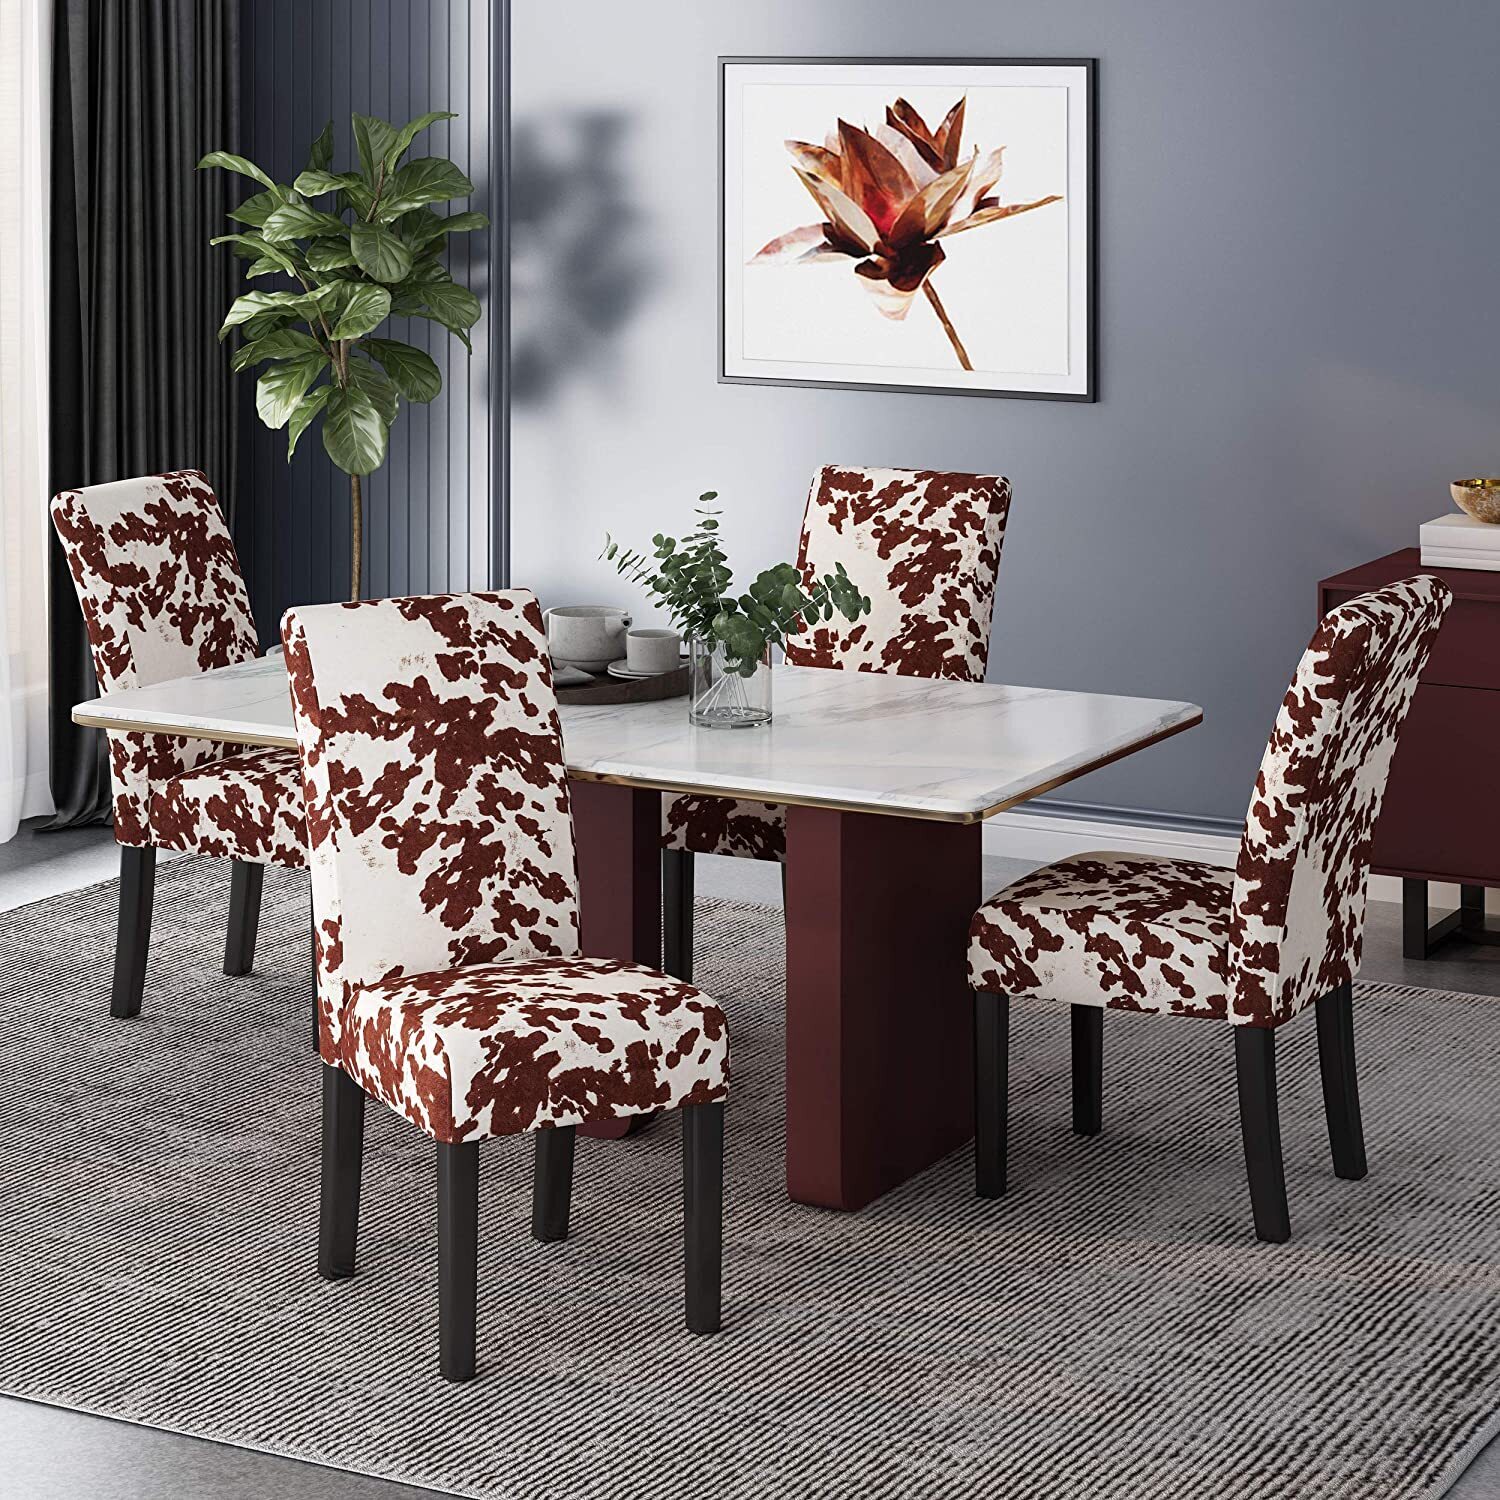 Upholstered animal print dining chairs with a high back